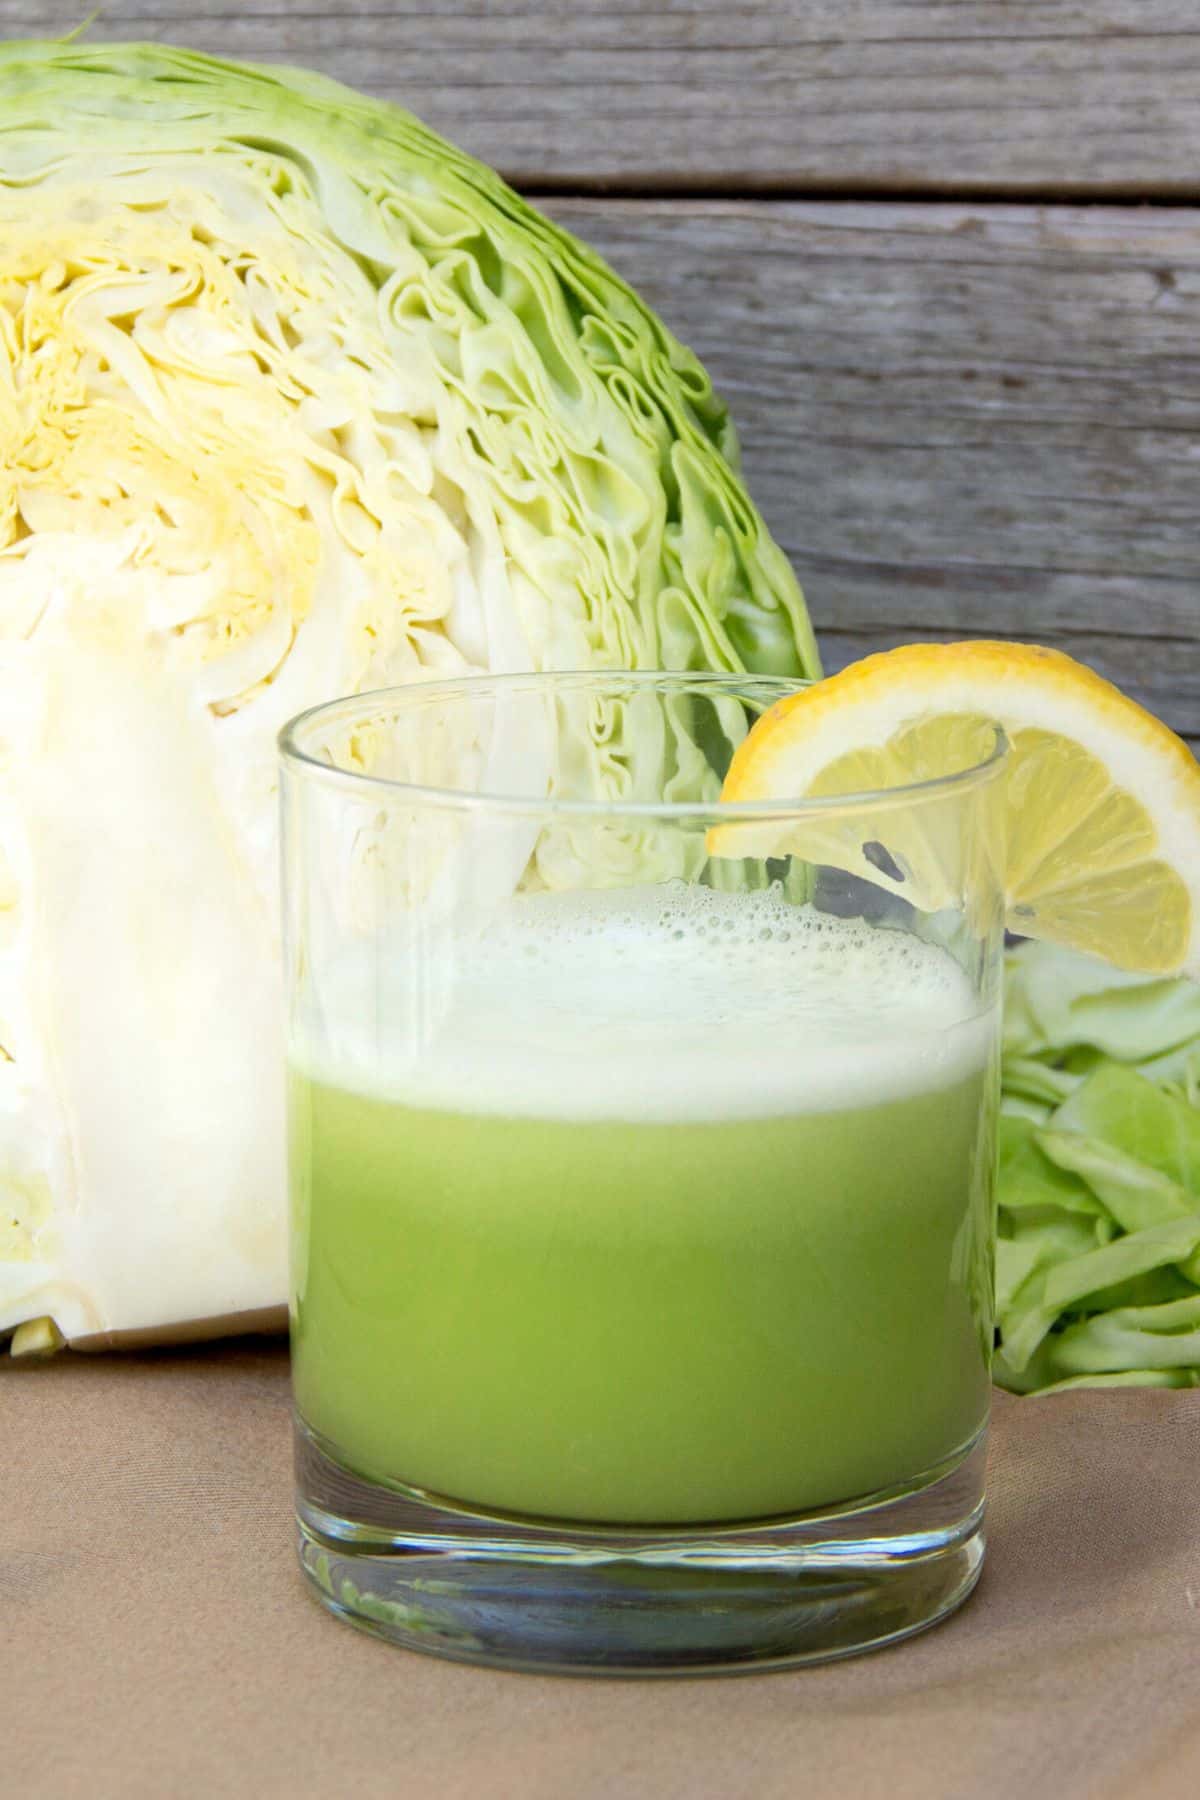 https://www.cleaneatingkitchen.com/wp-content/uploads/2022/12/cabbage-juice-in-glass-with-slice-of-lemon-hero.jpg